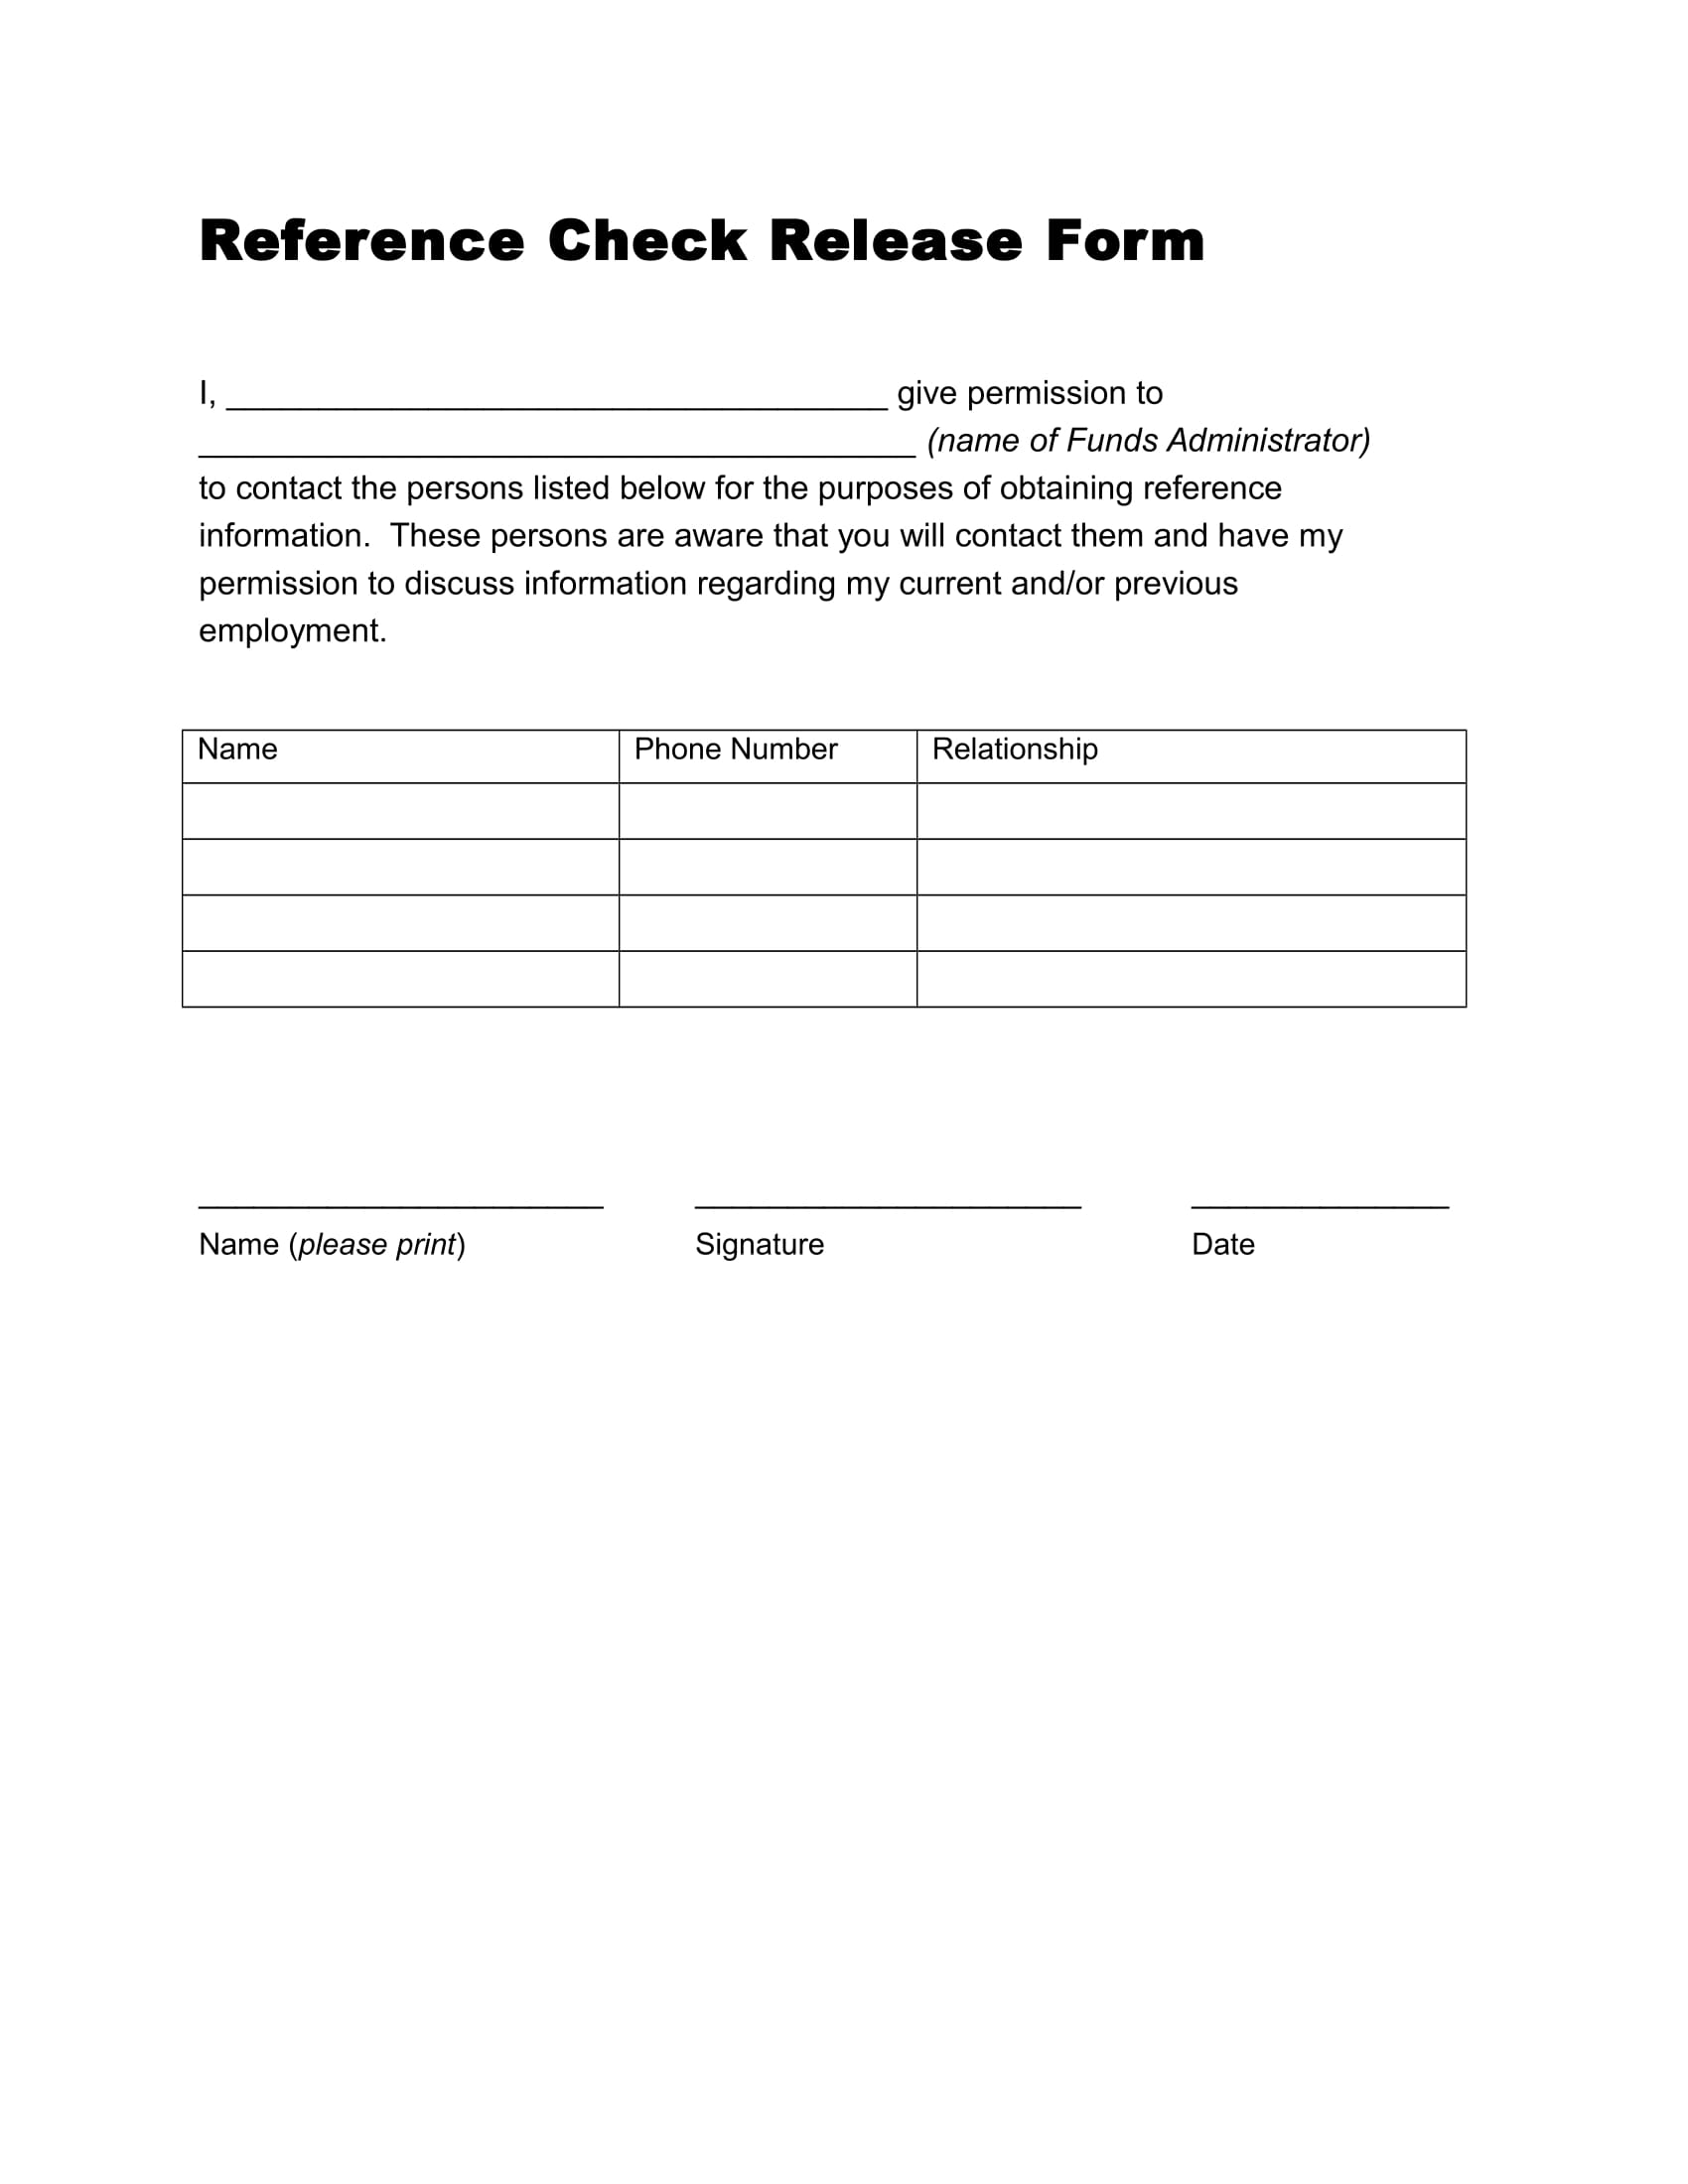 reference check release form in doc 1